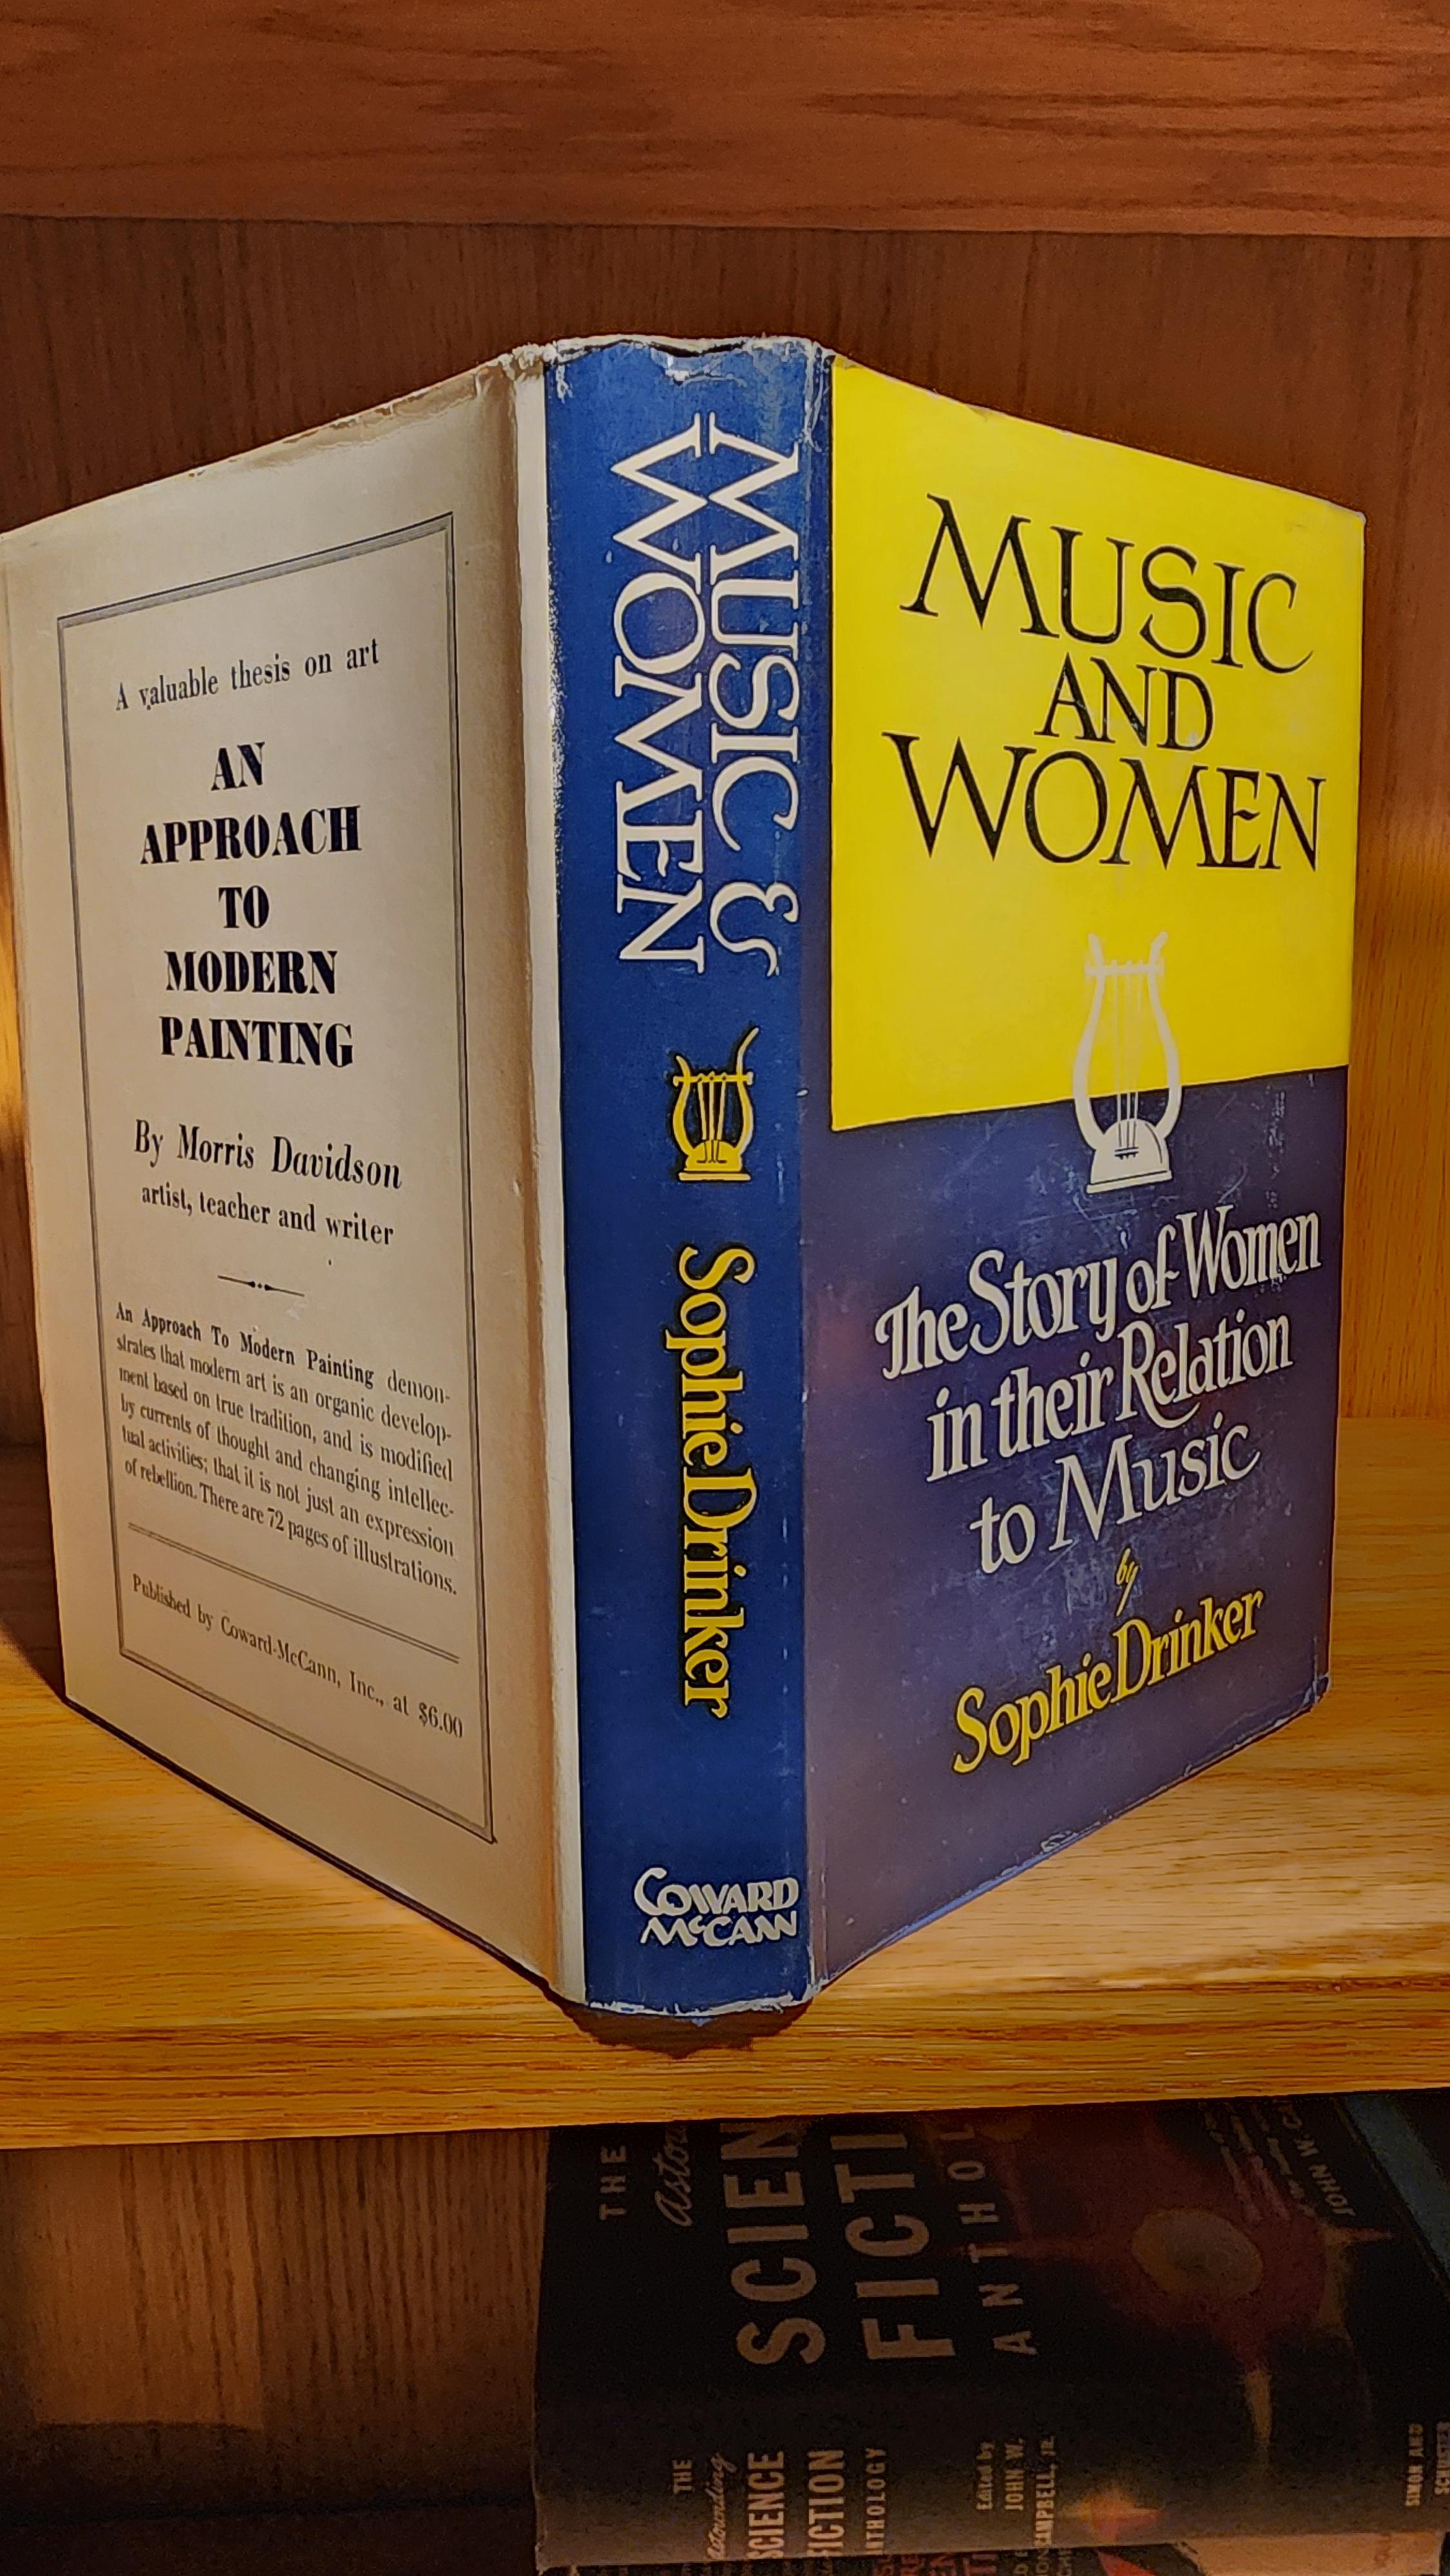 Music and Women: The story of women in their relation to music - Hardcover, by Sophie Drinker, 1948. Coward-McCann, Hardcover